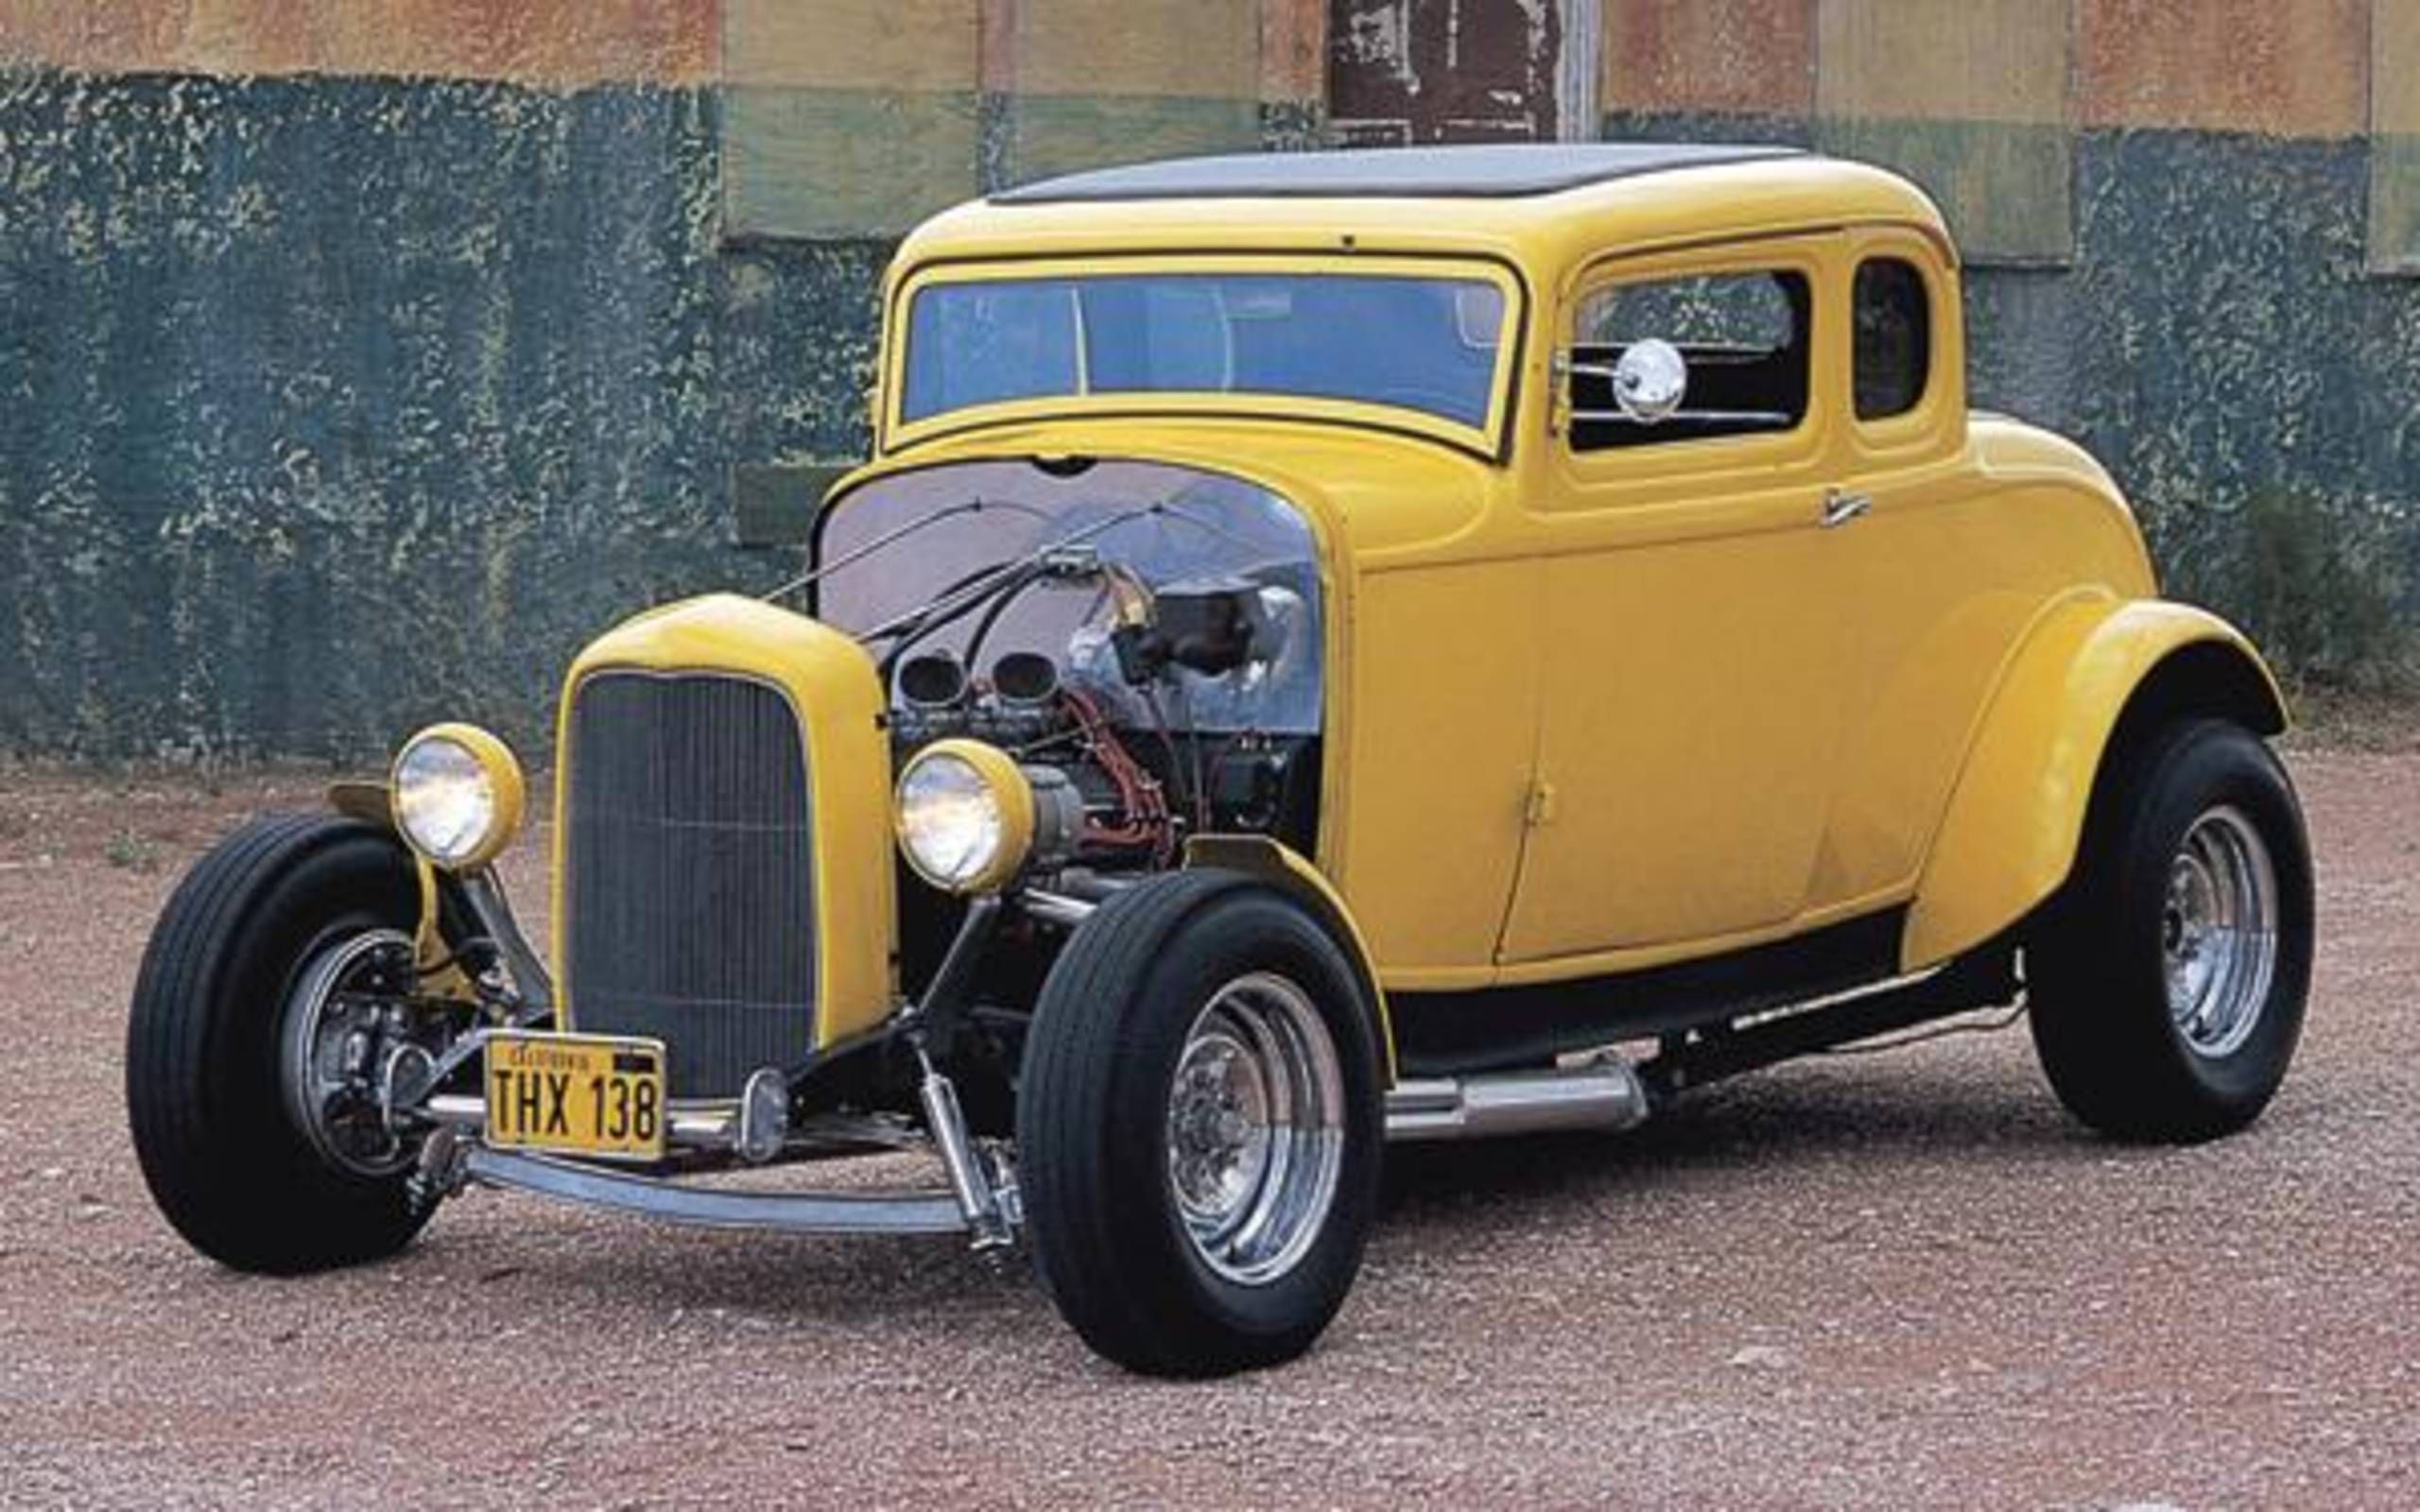 Hot-Rod Fame: Choosing the best of the '32s